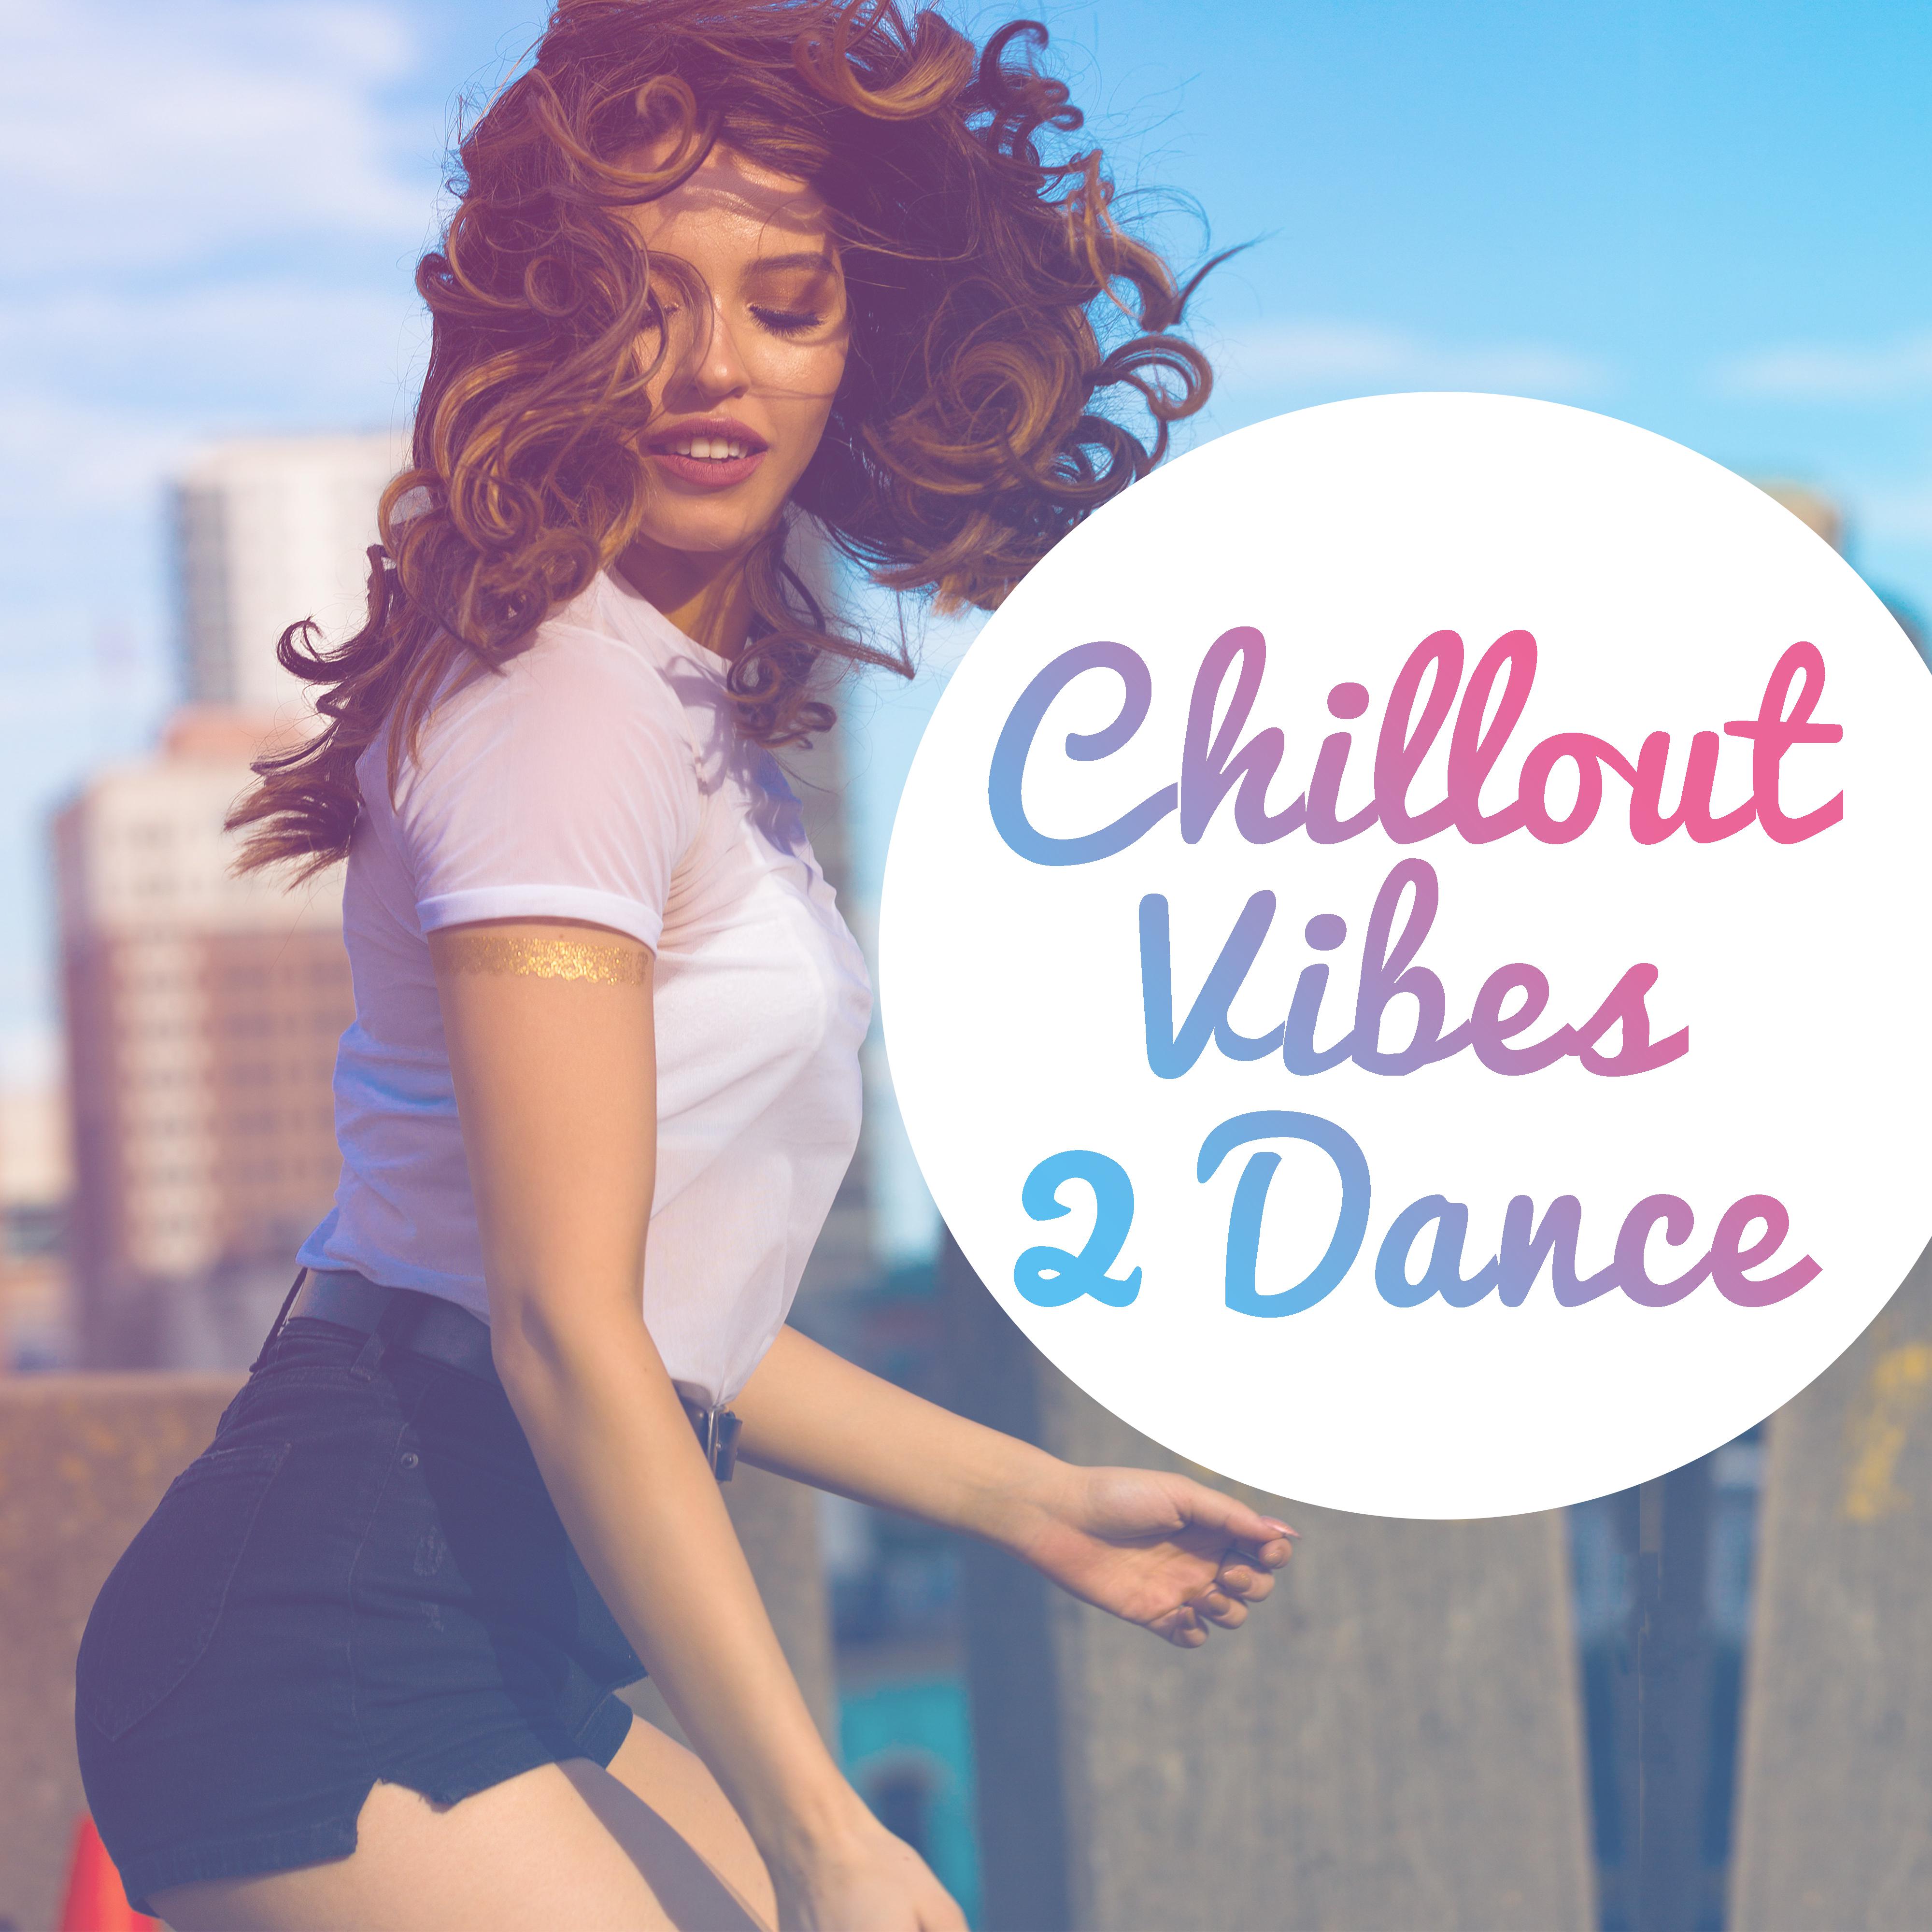 Chillout Vibes 2 Dance – Relaxed Beats, Chill Out 2017, Dance Music, Chillout Lounge, Electronic Music